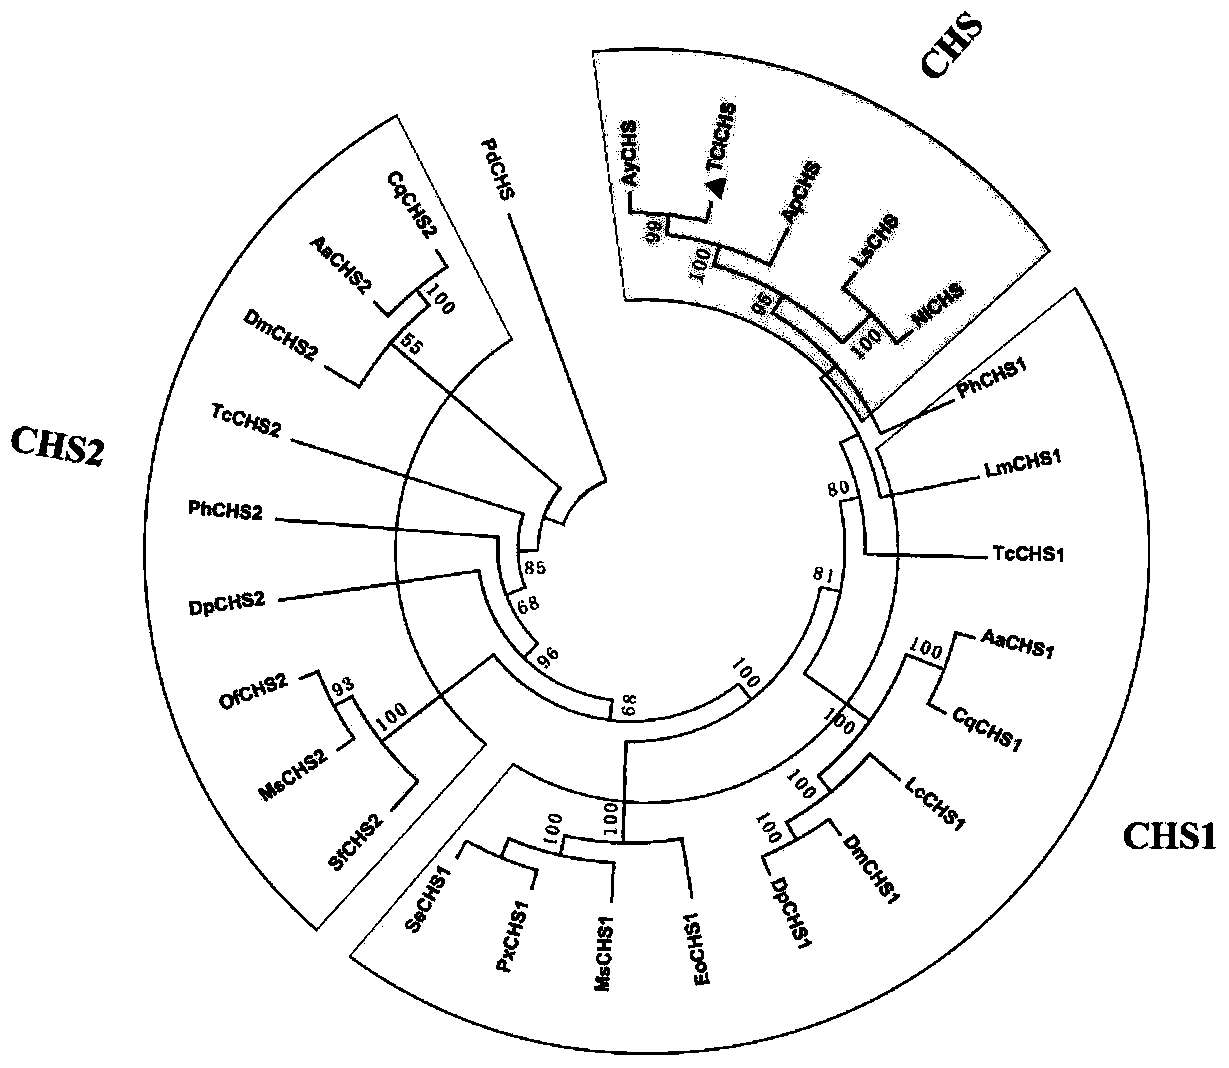 Chitin synthase gene and dsRNA of the brown orange aphid